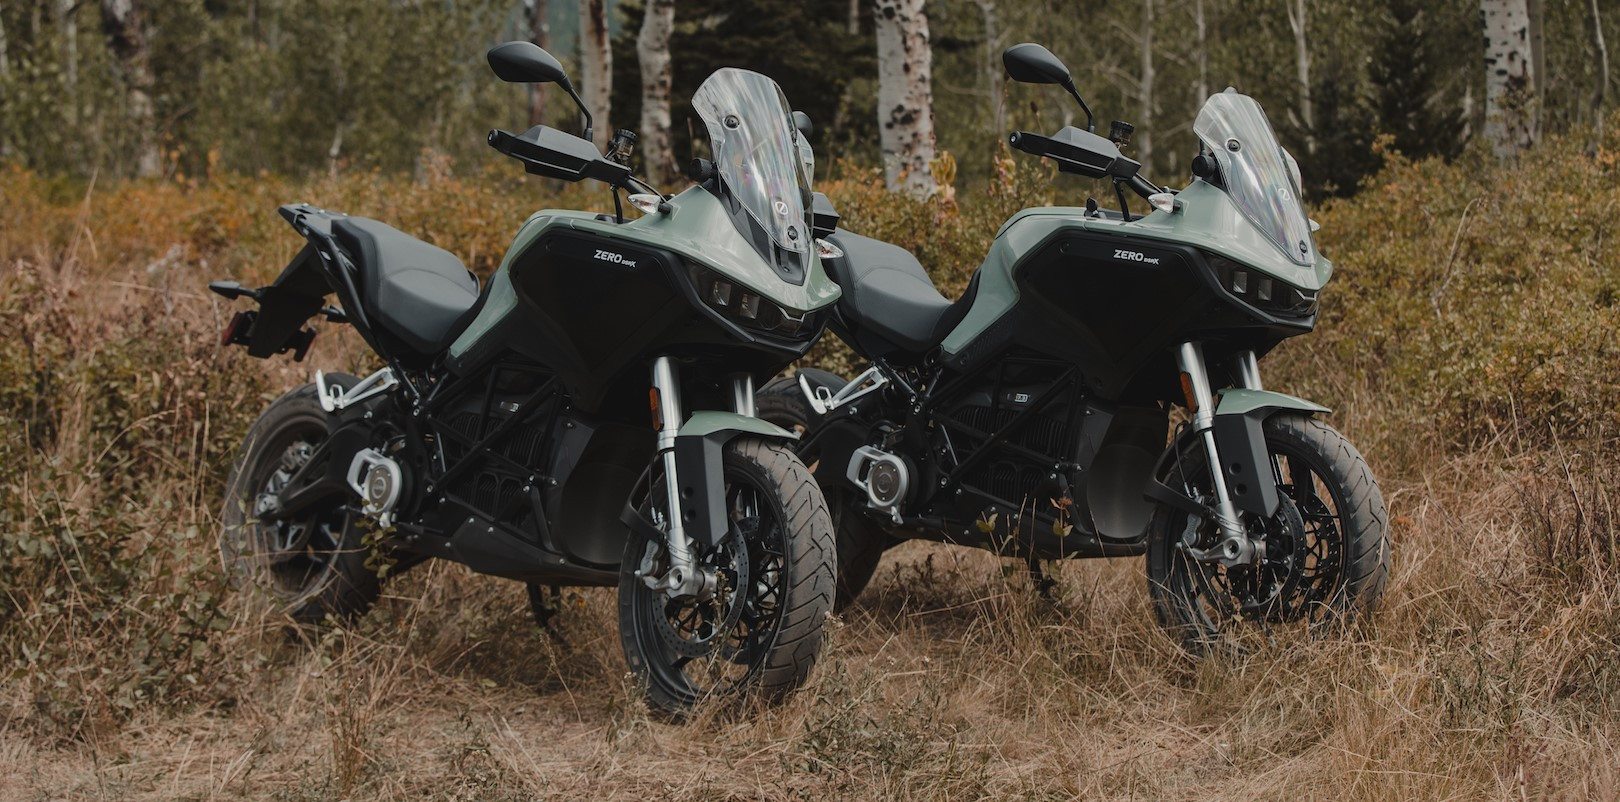 The Zero DSR/X electric adventure bike is the latest model to be introduced and equipped with Pirelli tires. Photo courtesy Pirelli.